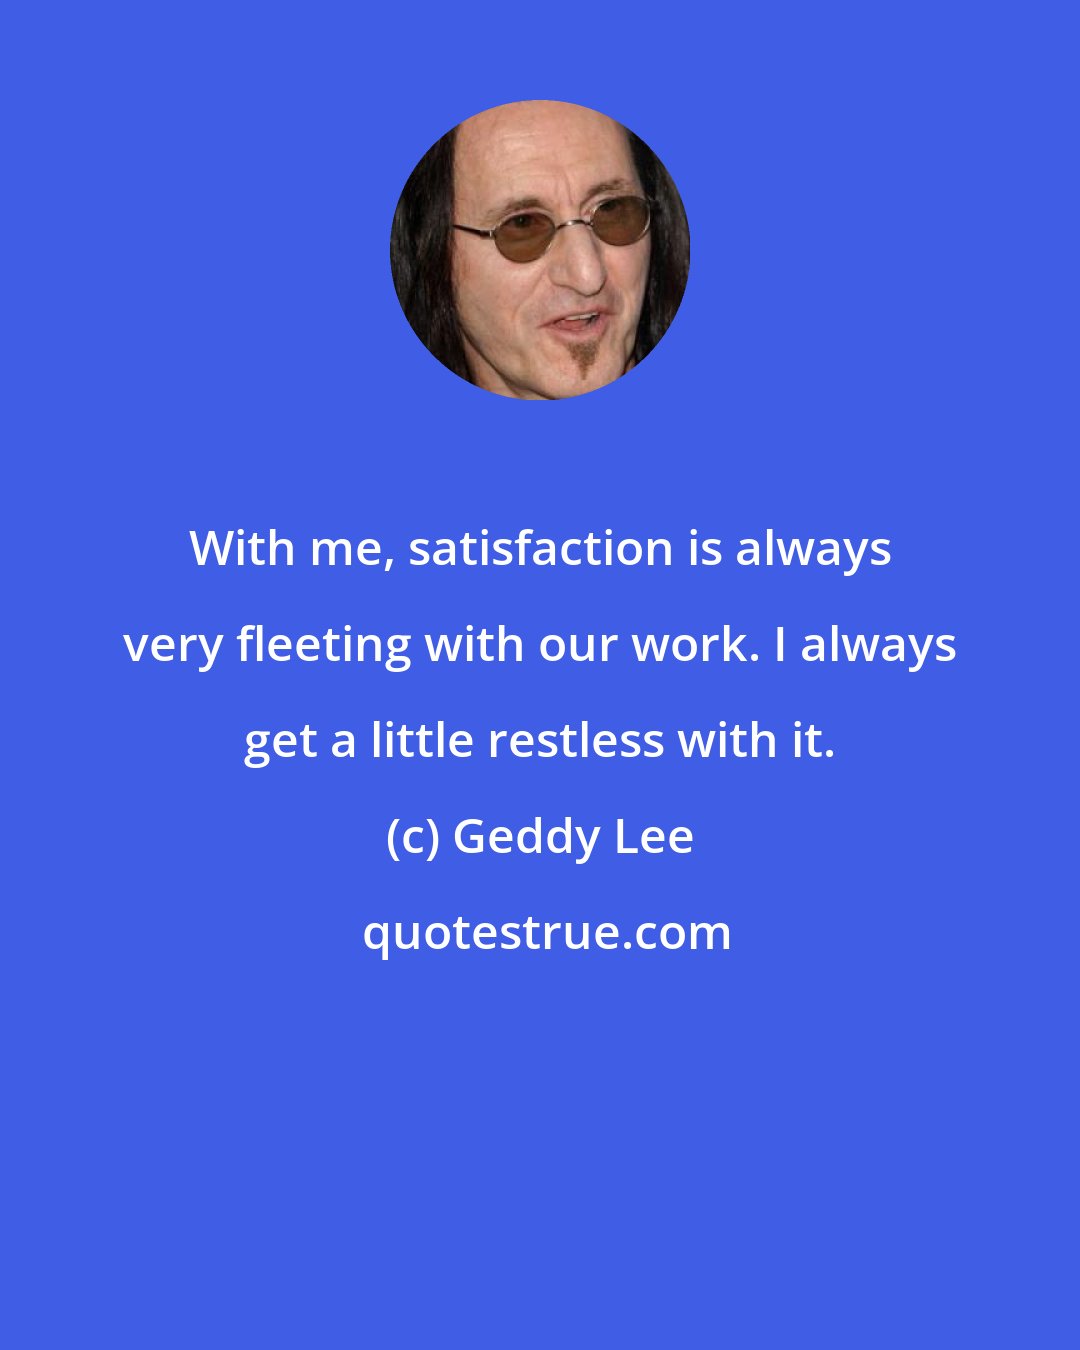 Geddy Lee: With me, satisfaction is always very fleeting with our work. I always get a little restless with it.